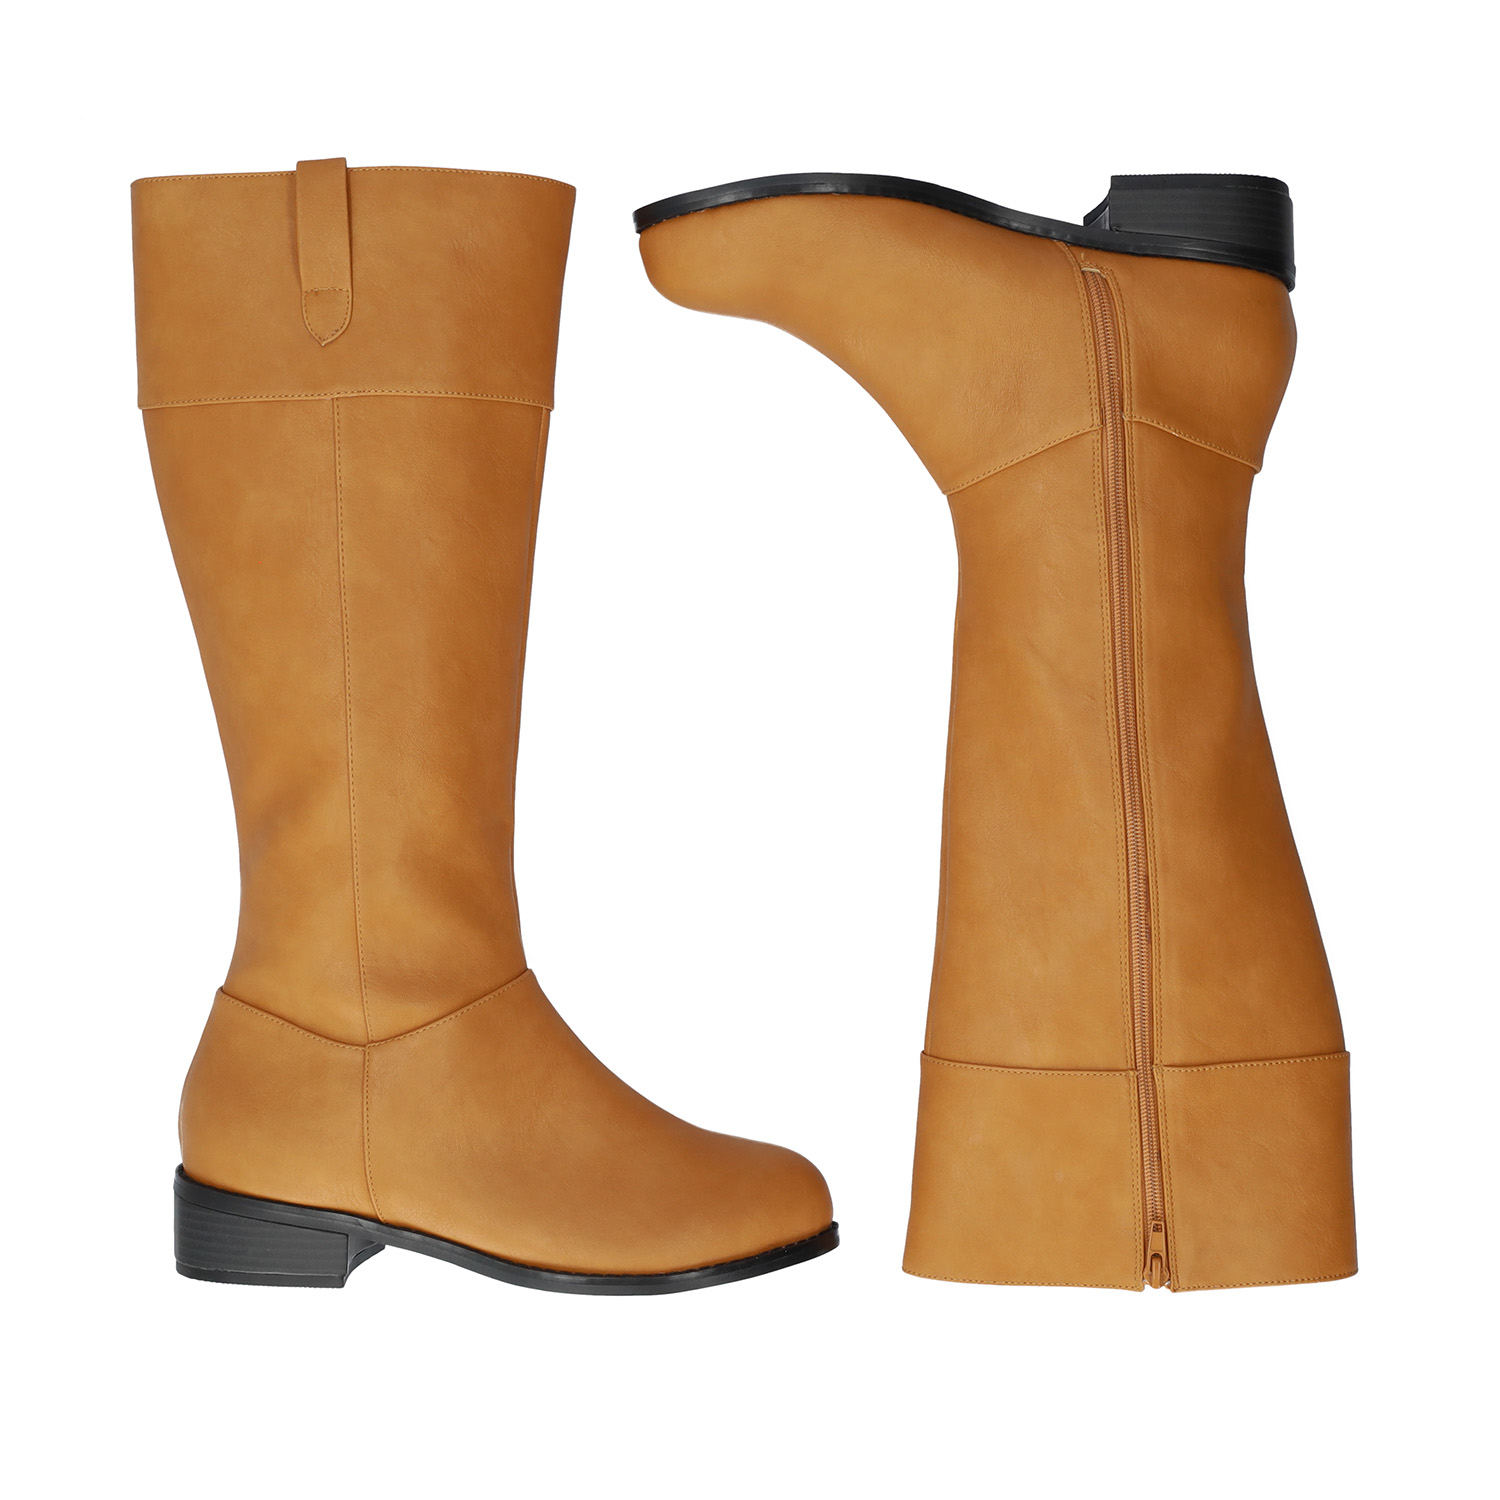 Flat high-calf boots in camel faux leather. 